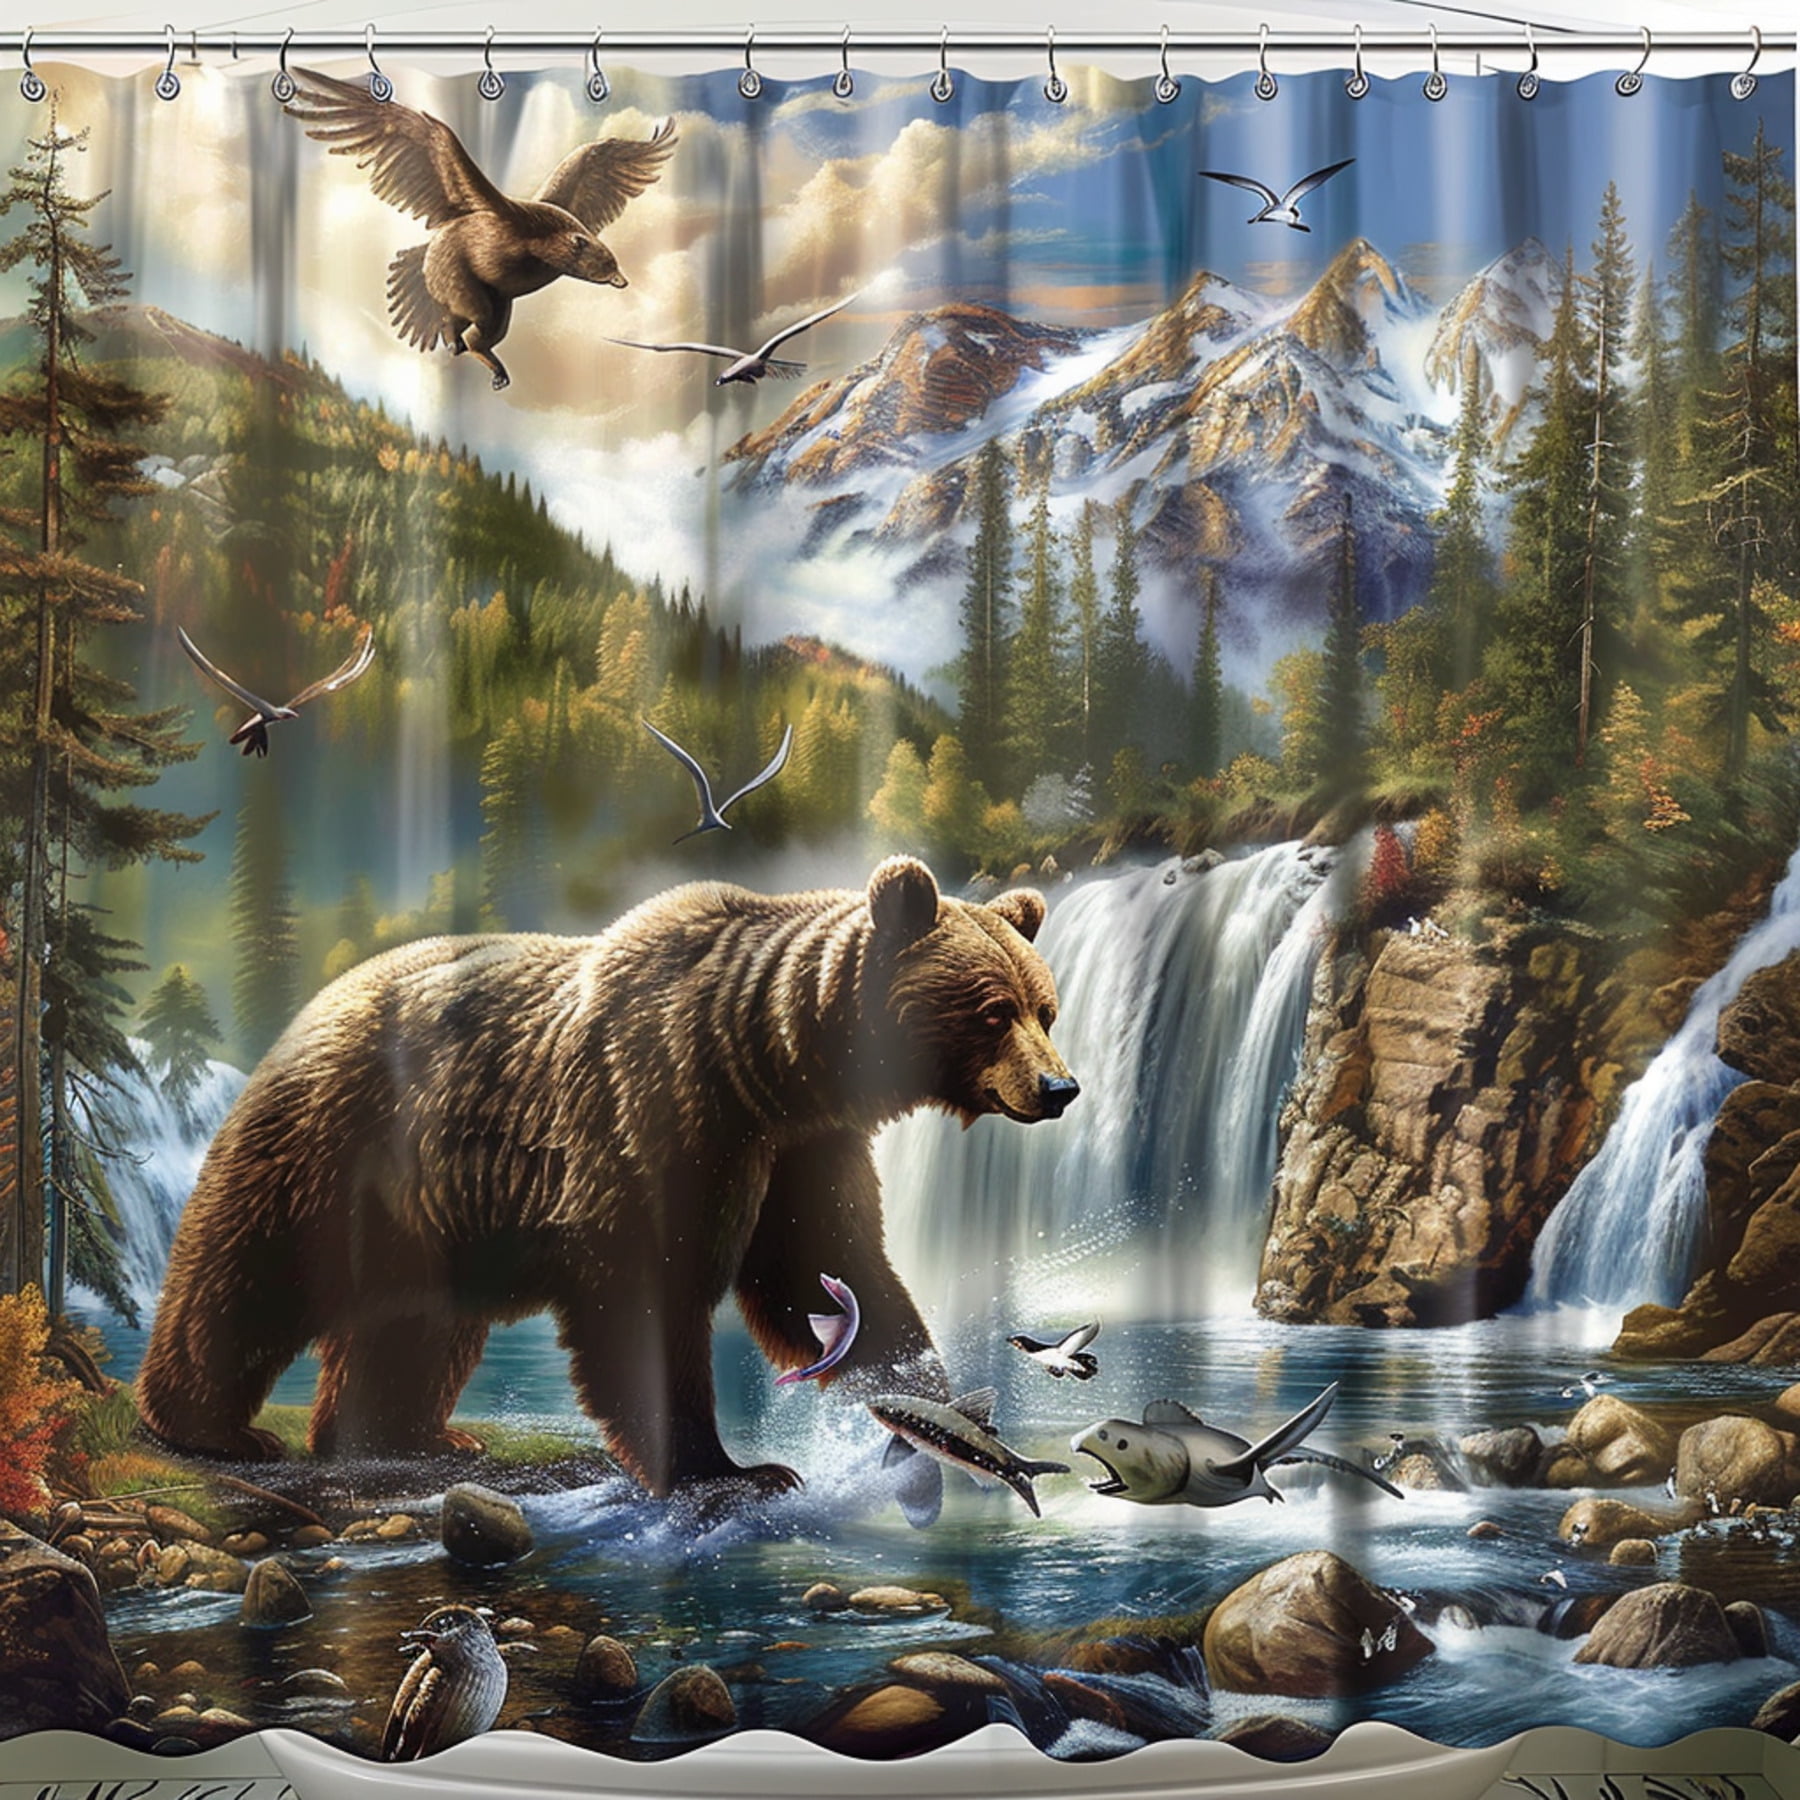 Wildlife Adventure Shower Curtain Bear Chasing Fish in Mountain River ...